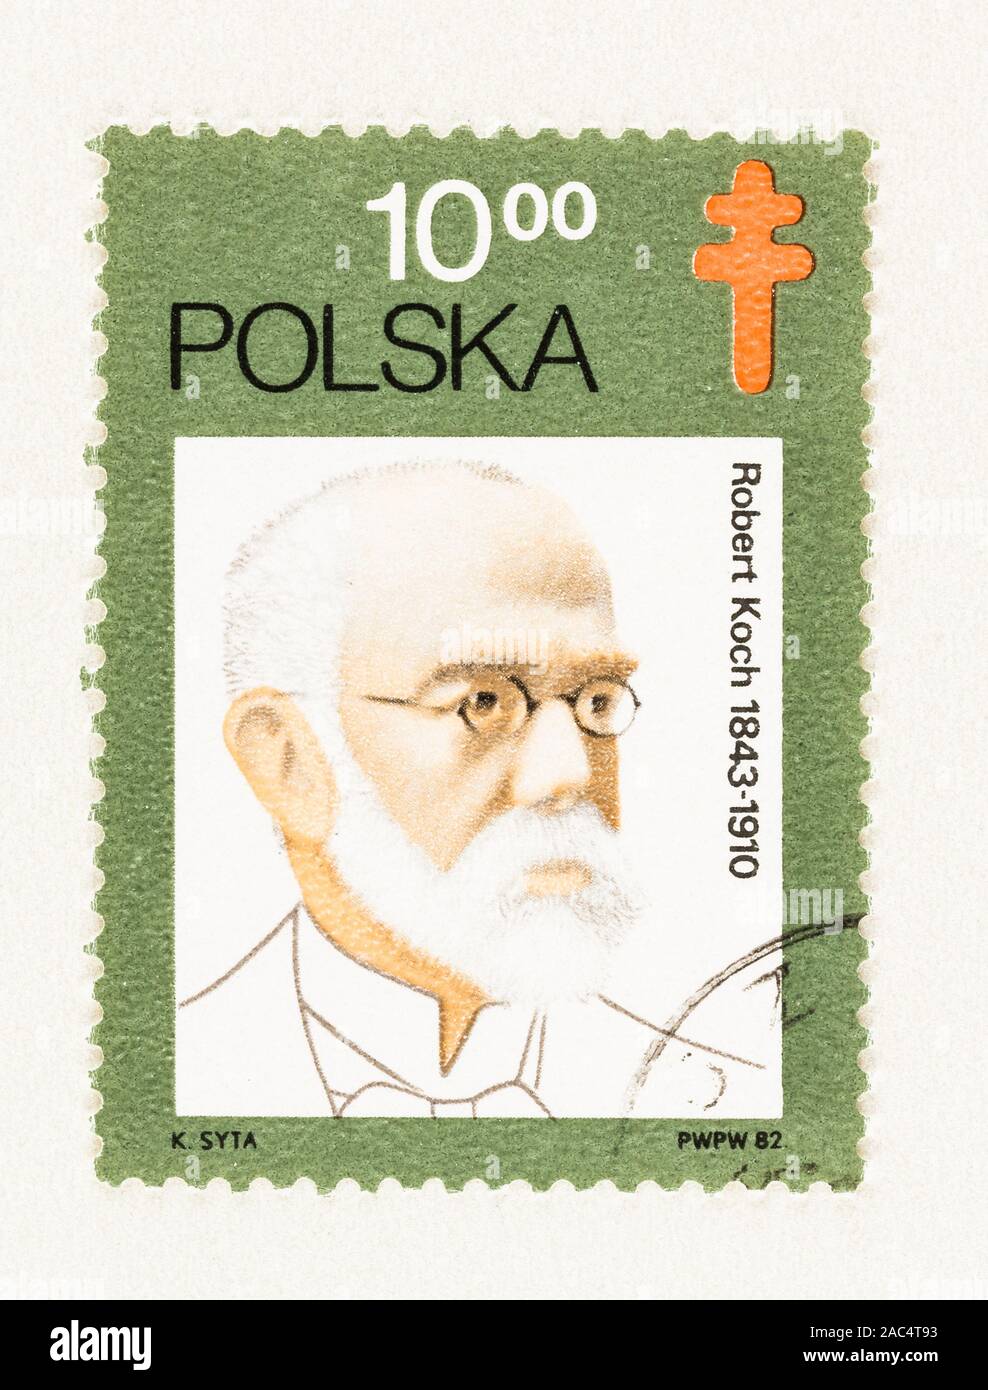 SEATTLE WASHINGTON - October 9, 2019: Used 1982 stamp of Poland, featuring German microbiologist and Nobel laureate Robert Koch, celebrating 100 years Stock Photo